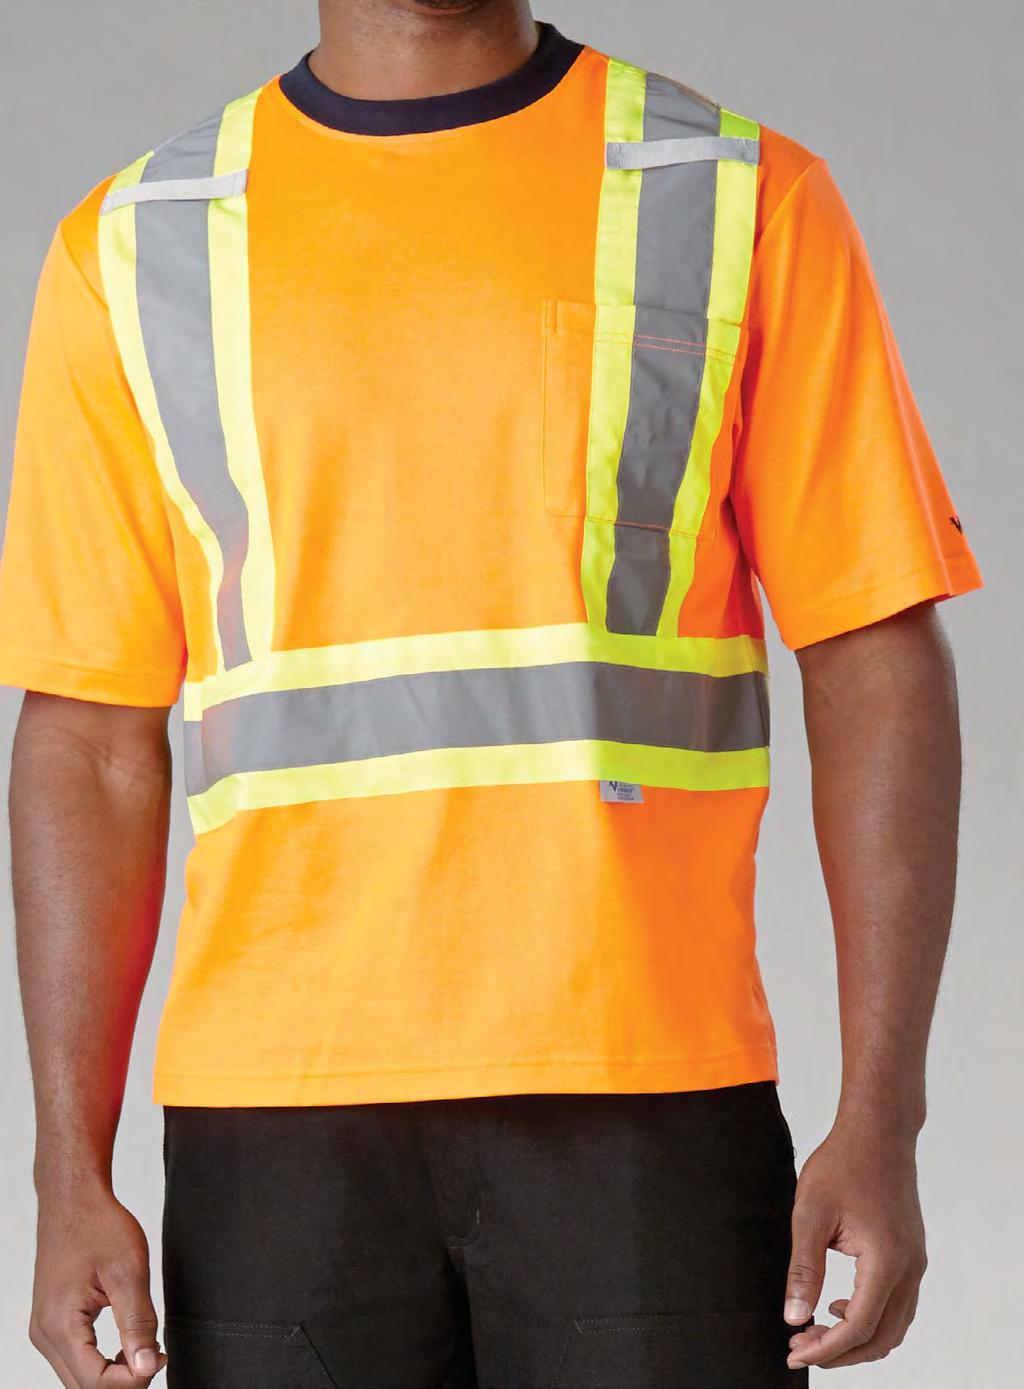 SAFETY SAFETY COTTON LINED SHIRTS 4 contrasting Vi-brance reflective tape in WCB/Work Safe